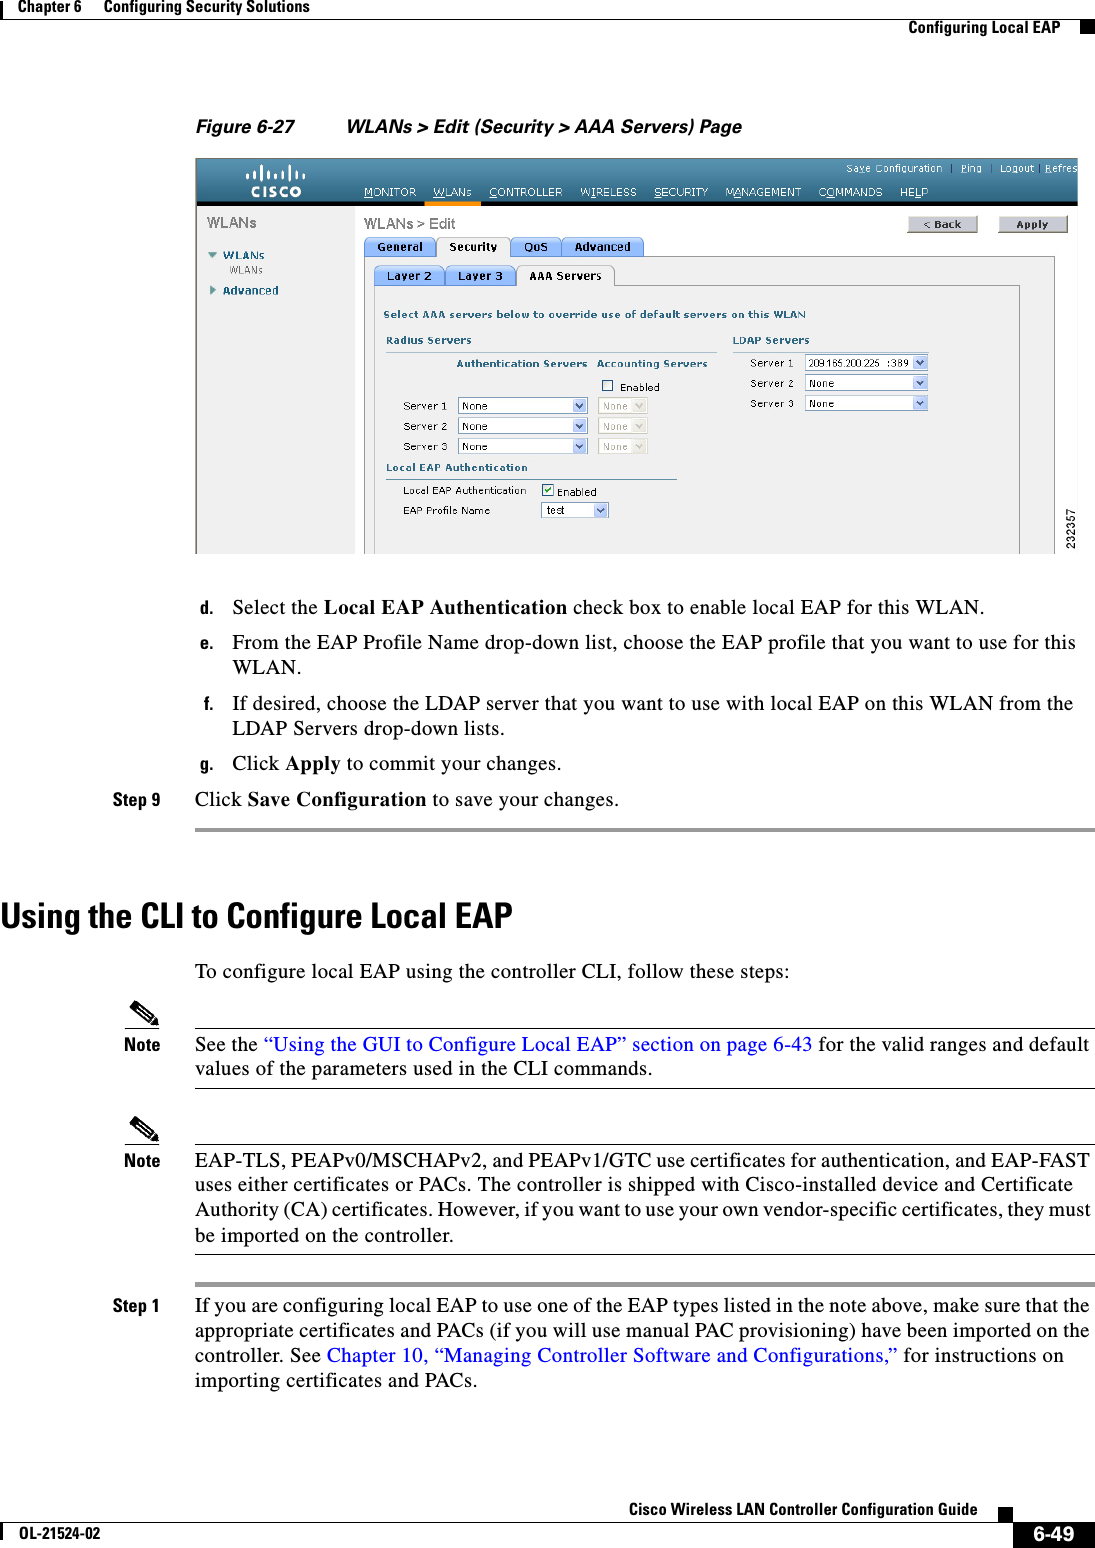  6-49Cisco Wireless LAN Controller Configuration GuideOL-21524-02Chapter 6      Configuring Security Solutions  Configuring Local EAPFigure 6-27 WLANs &gt; Edit (Security &gt; AAA Servers) Paged. Select the Local EAP Authentication check box to enable local EAP for this WLAN.e. From the EAP Profile Name drop-down list, choose the EAP profile that you want to use for this WLAN.f. If desired, choose the LDAP server that you want to use with local EAP on this WLAN from the LDAP Servers drop-down lists.g. Click Apply to commit your changes.Step 9 Click Save Configuration to save your changes.Using the CLI to Configure Local EAPTo configure local EAP using the controller CLI, follow these steps:Note See the “Using the GUI to Configure Local EAP” section on page 6-43 for the valid ranges and default values of the parameters used in the CLI commands.Note EAP-TLS, PEAPv0/MSCHAPv2, and PEAPv1/GTC use certificates for authentication, and EAP-FAST uses either certificates or PACs. The controller is shipped with Cisco-installed device and Certificate Authority (CA) certificates. However, if you want to use your own vendor-specific certificates, they must be imported on the controller. Step 1 If you are configuring local EAP to use one of the EAP types listed in the note above, make sure that the appropriate certificates and PACs (if you will use manual PAC provisioning) have been imported on the controller. See Chapter 10, “Managing Controller Software and Configurations,” for instructions on importing certificates and PACs.